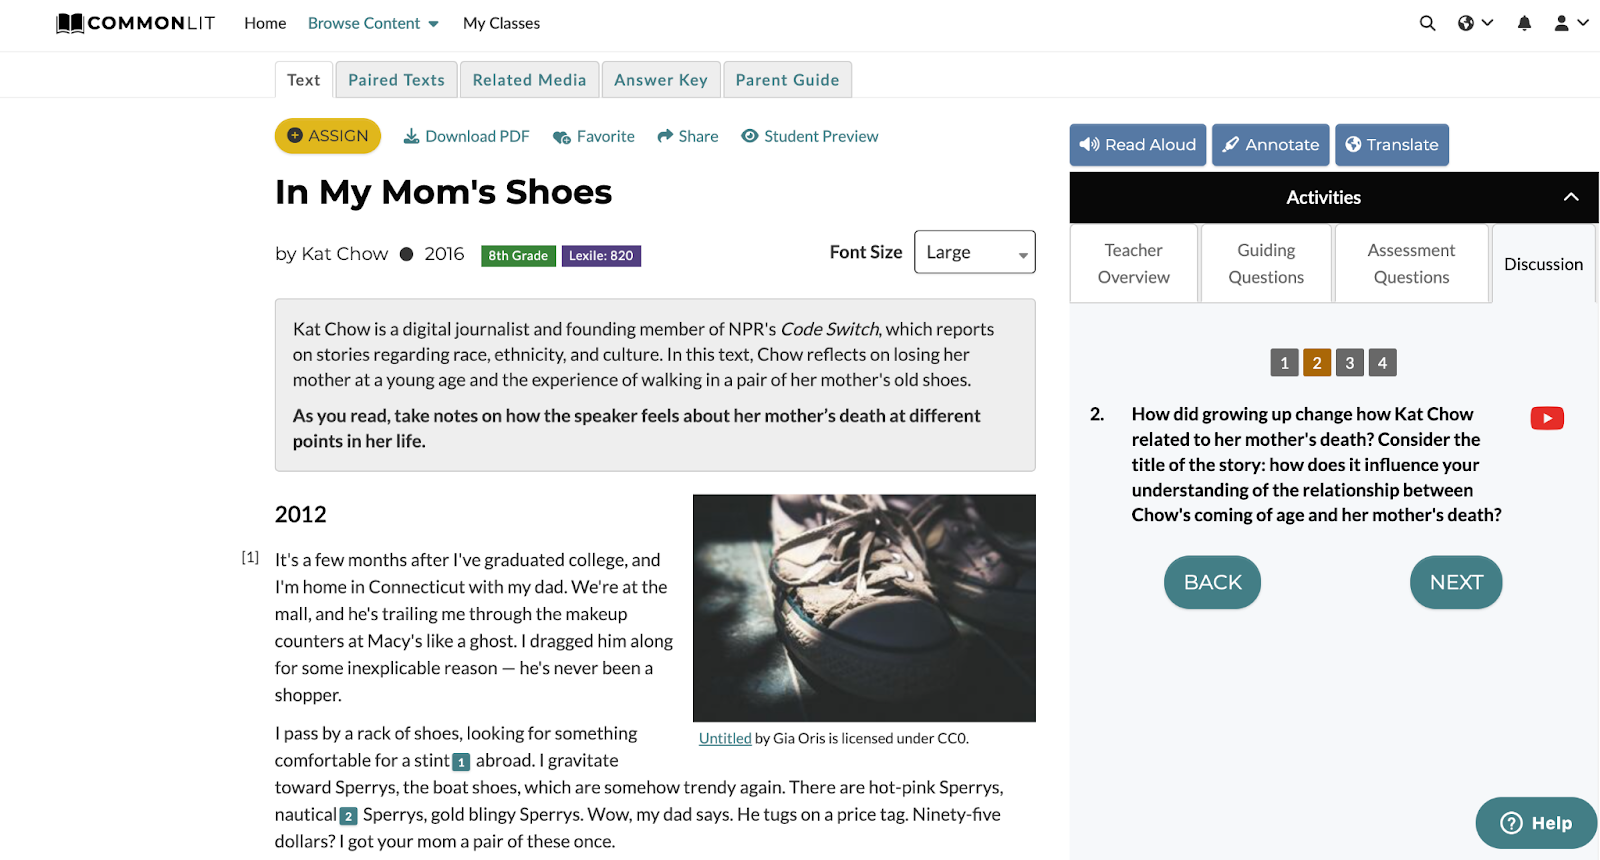 “In My Mom’s Shoes” by Kat Chow lesson with discussion question 2 highlighted in the Activities bar.